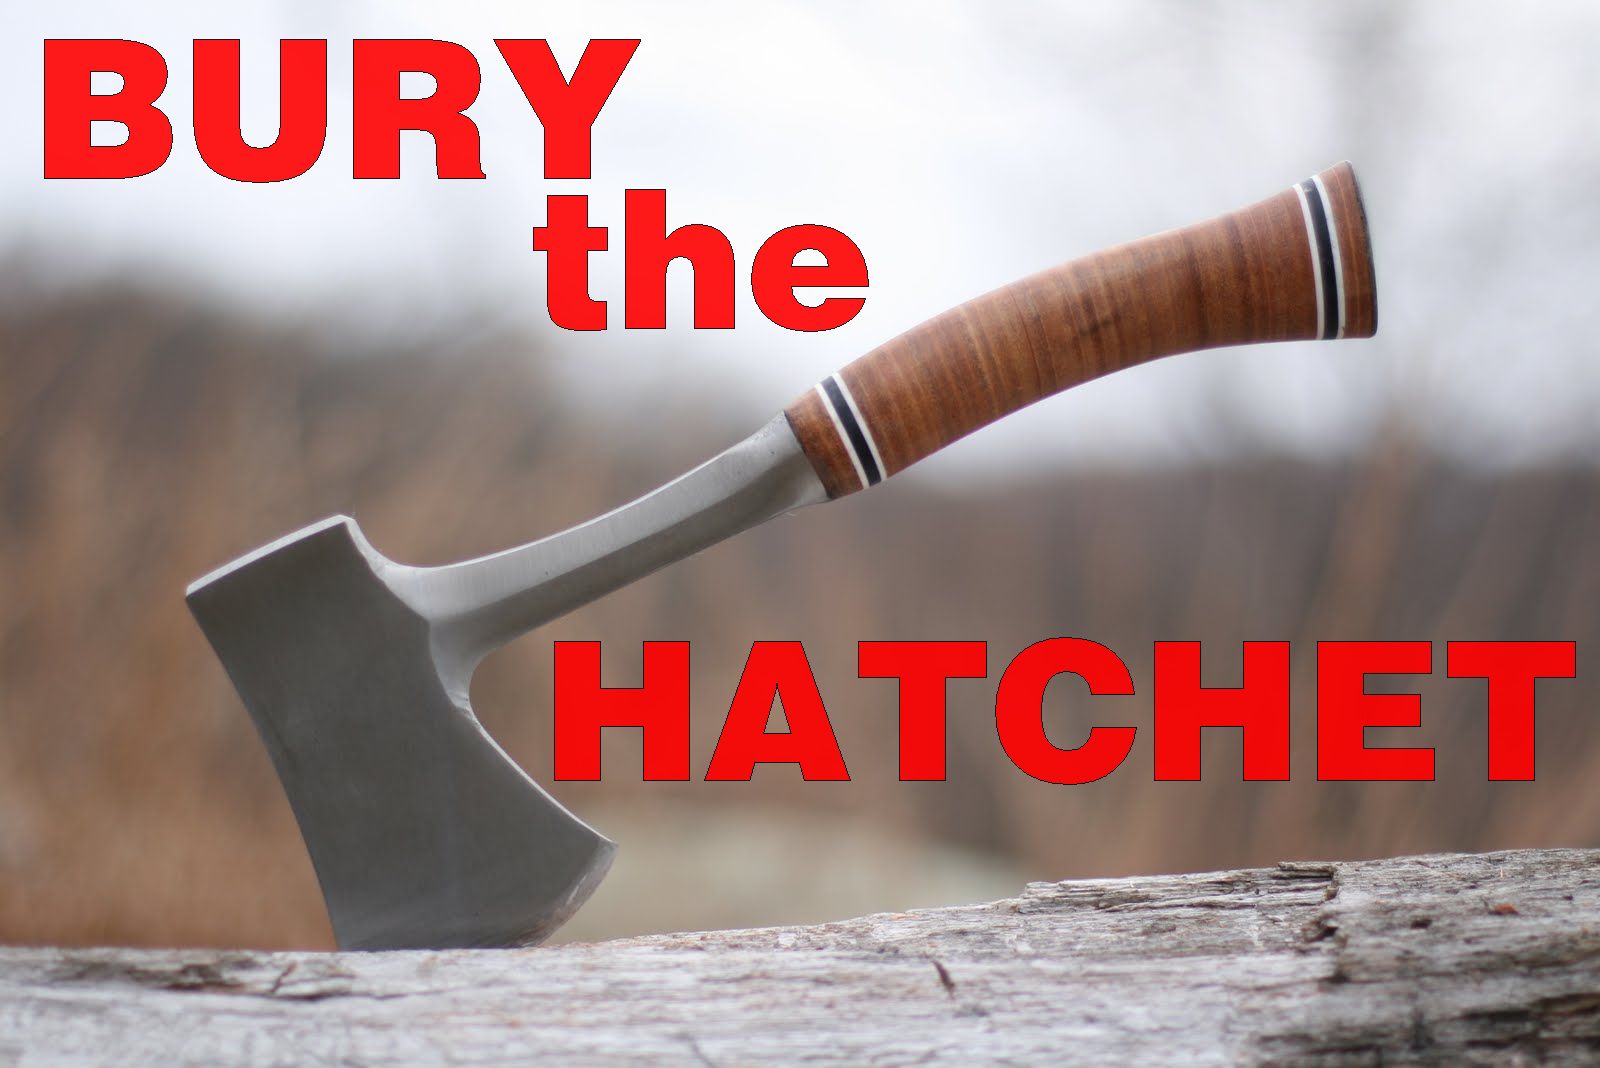 where does the saying to bury the hatchet come from and what does it mean